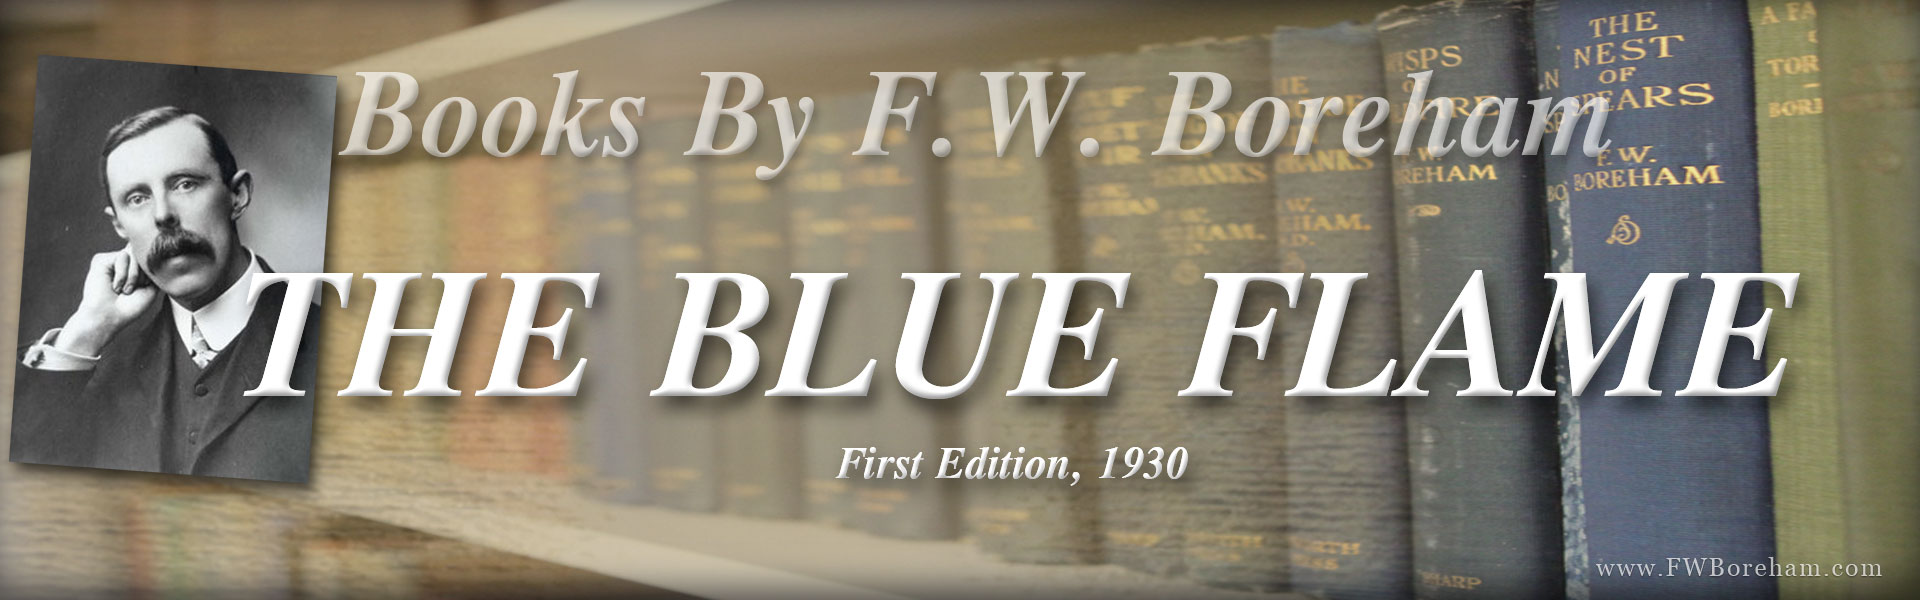 The Blue Flame, by FW Boreham